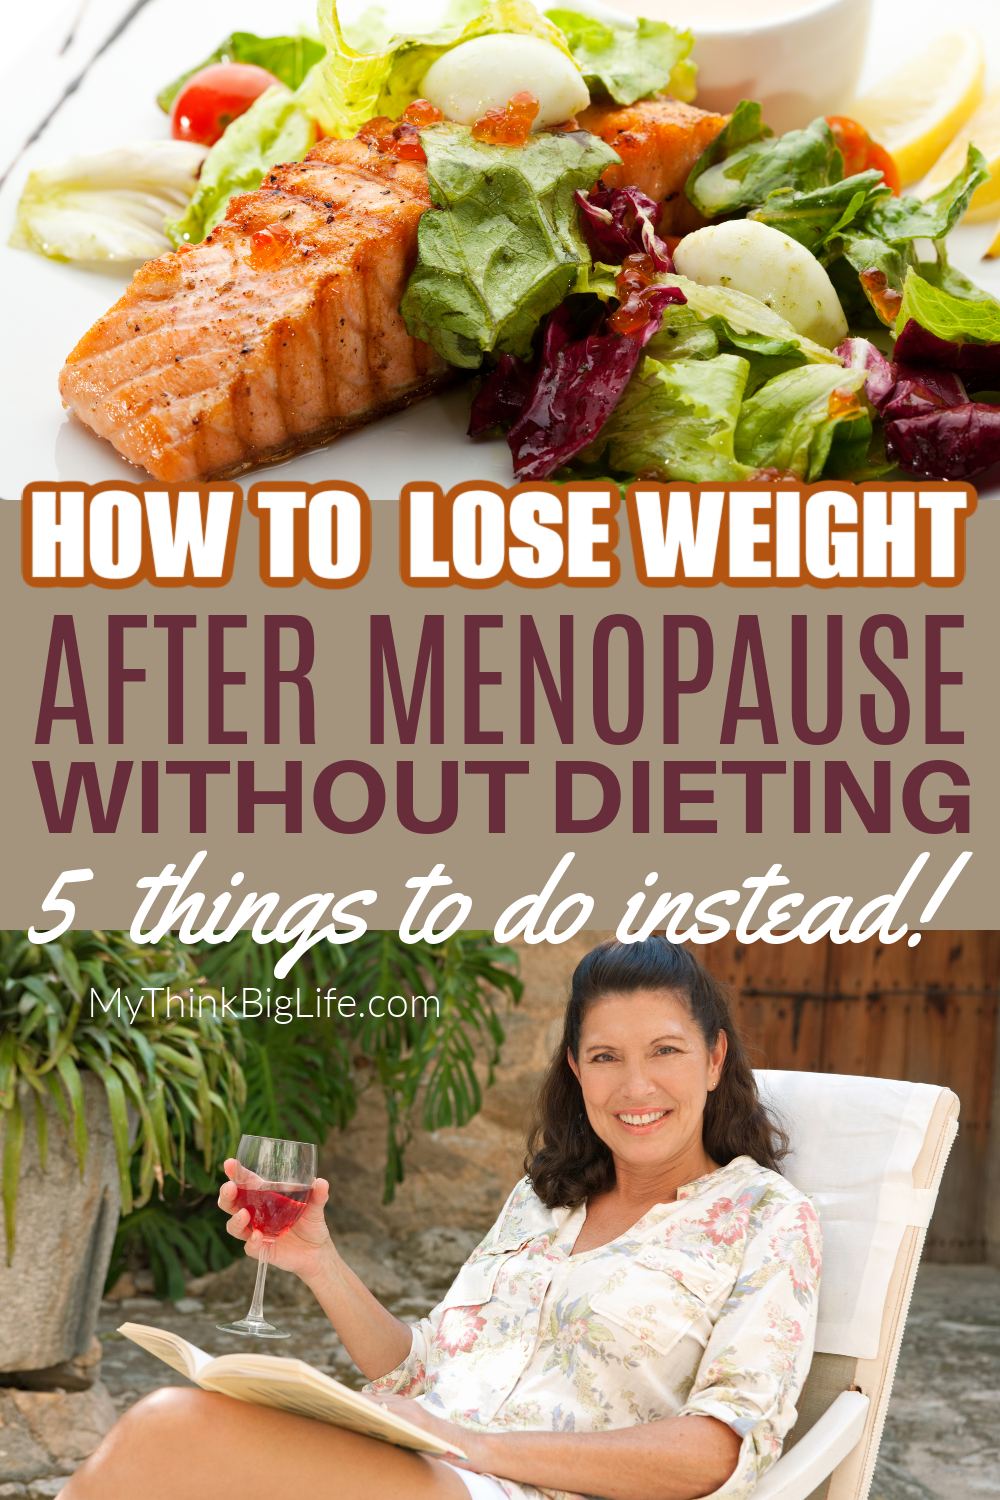 Picture of salad and woman with a glass of wine: Words say: How to lose weight without a diet after menopause.